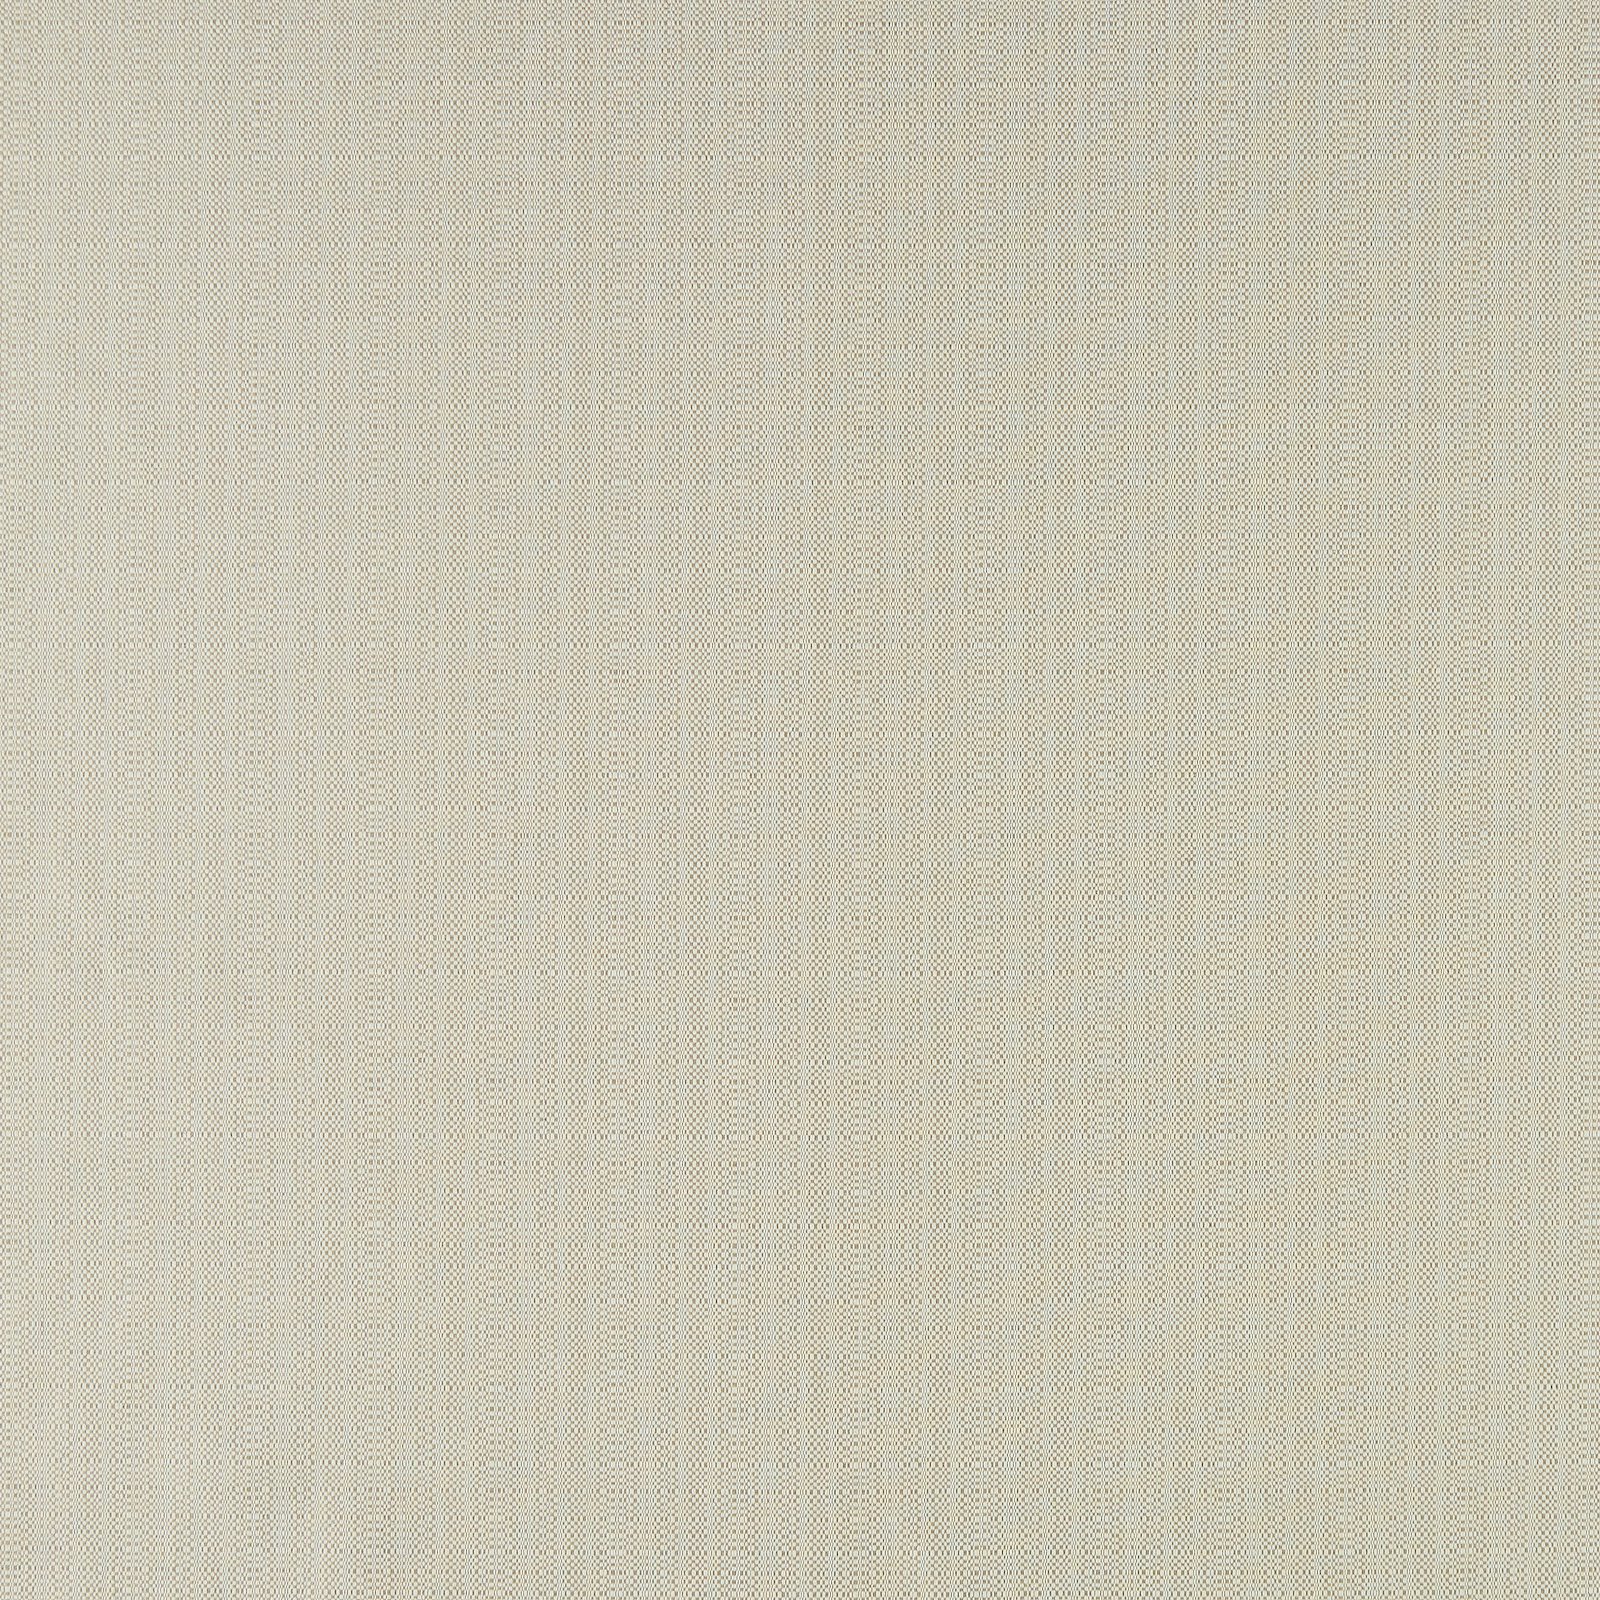 Recycled jacquard offwhite/sand mönstrad 826480_pack_sp